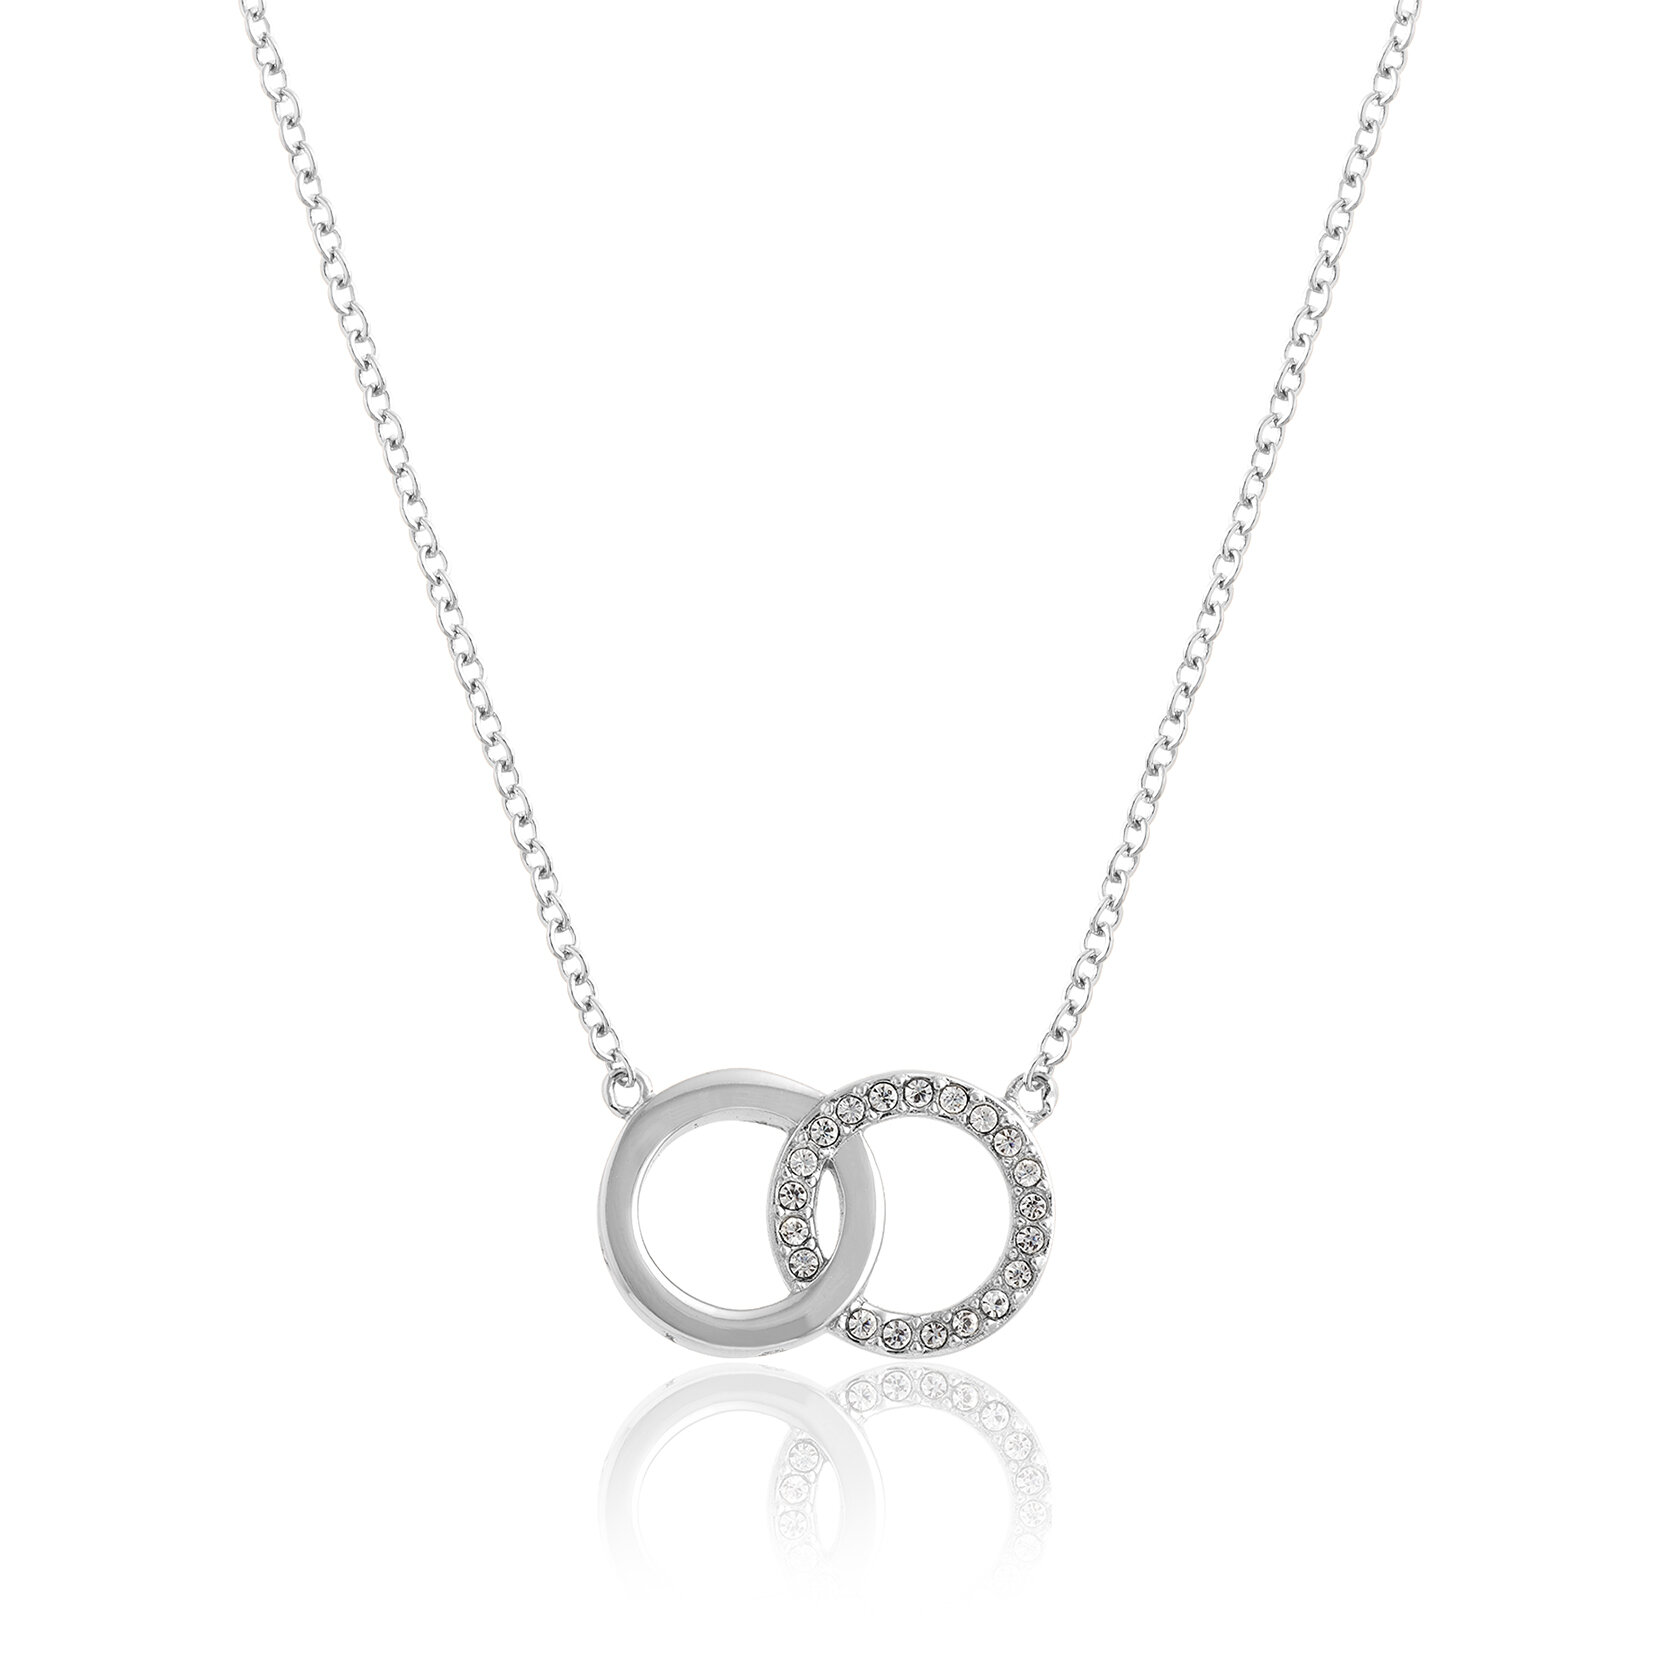 Collier Classic Bejewelled Interlink argent